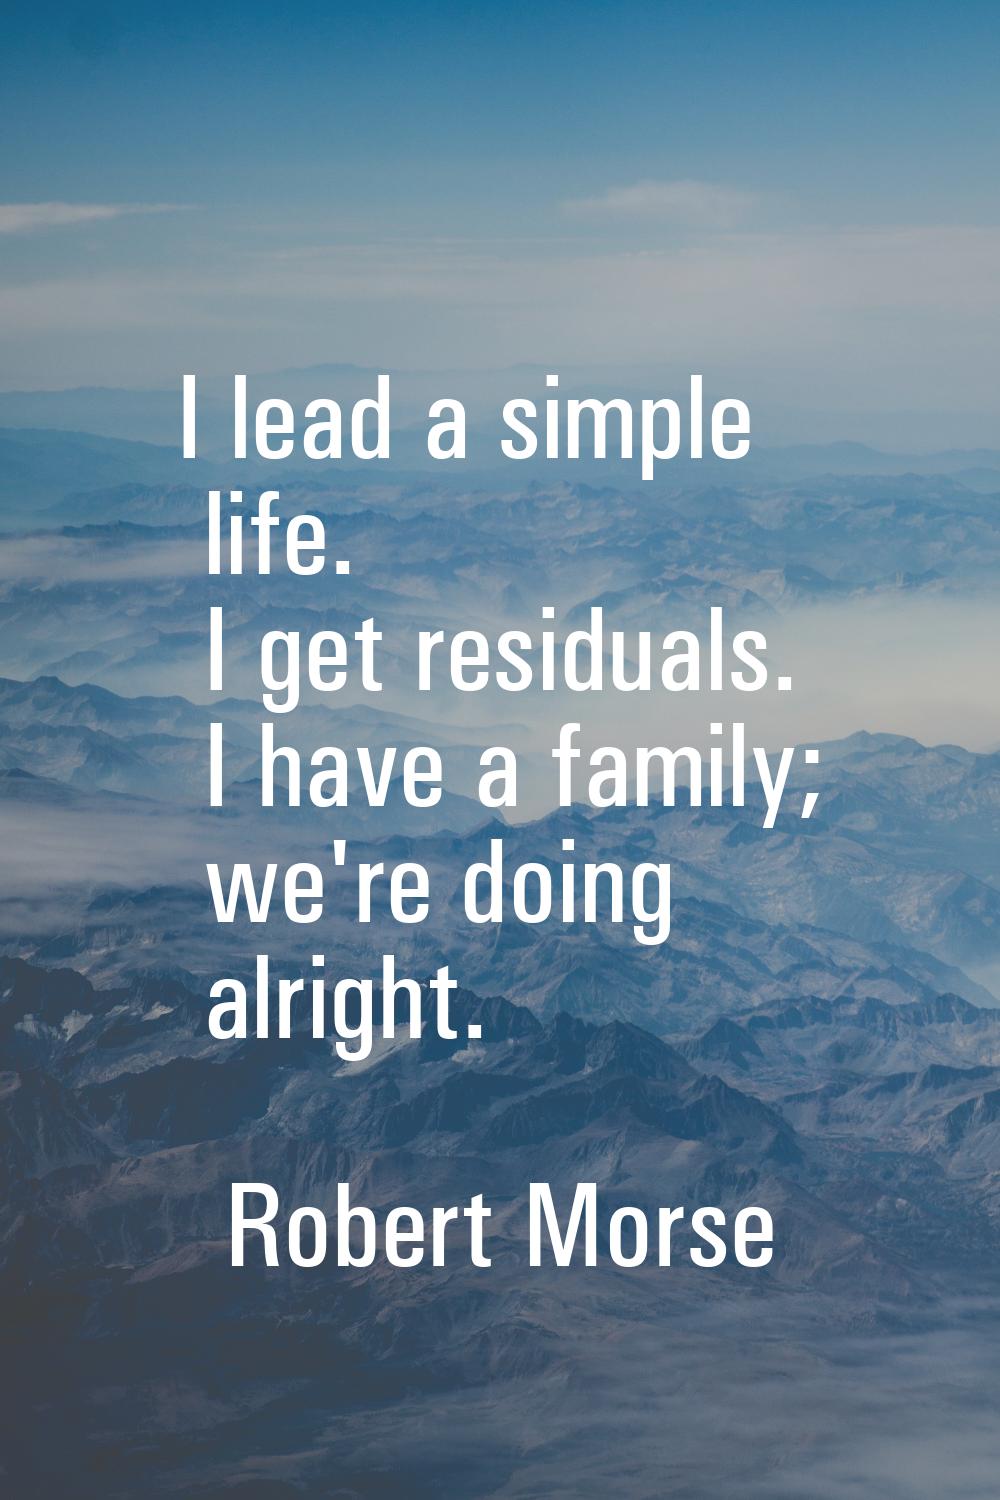 I lead a simple life. I get residuals. I have a family; we're doing alright.